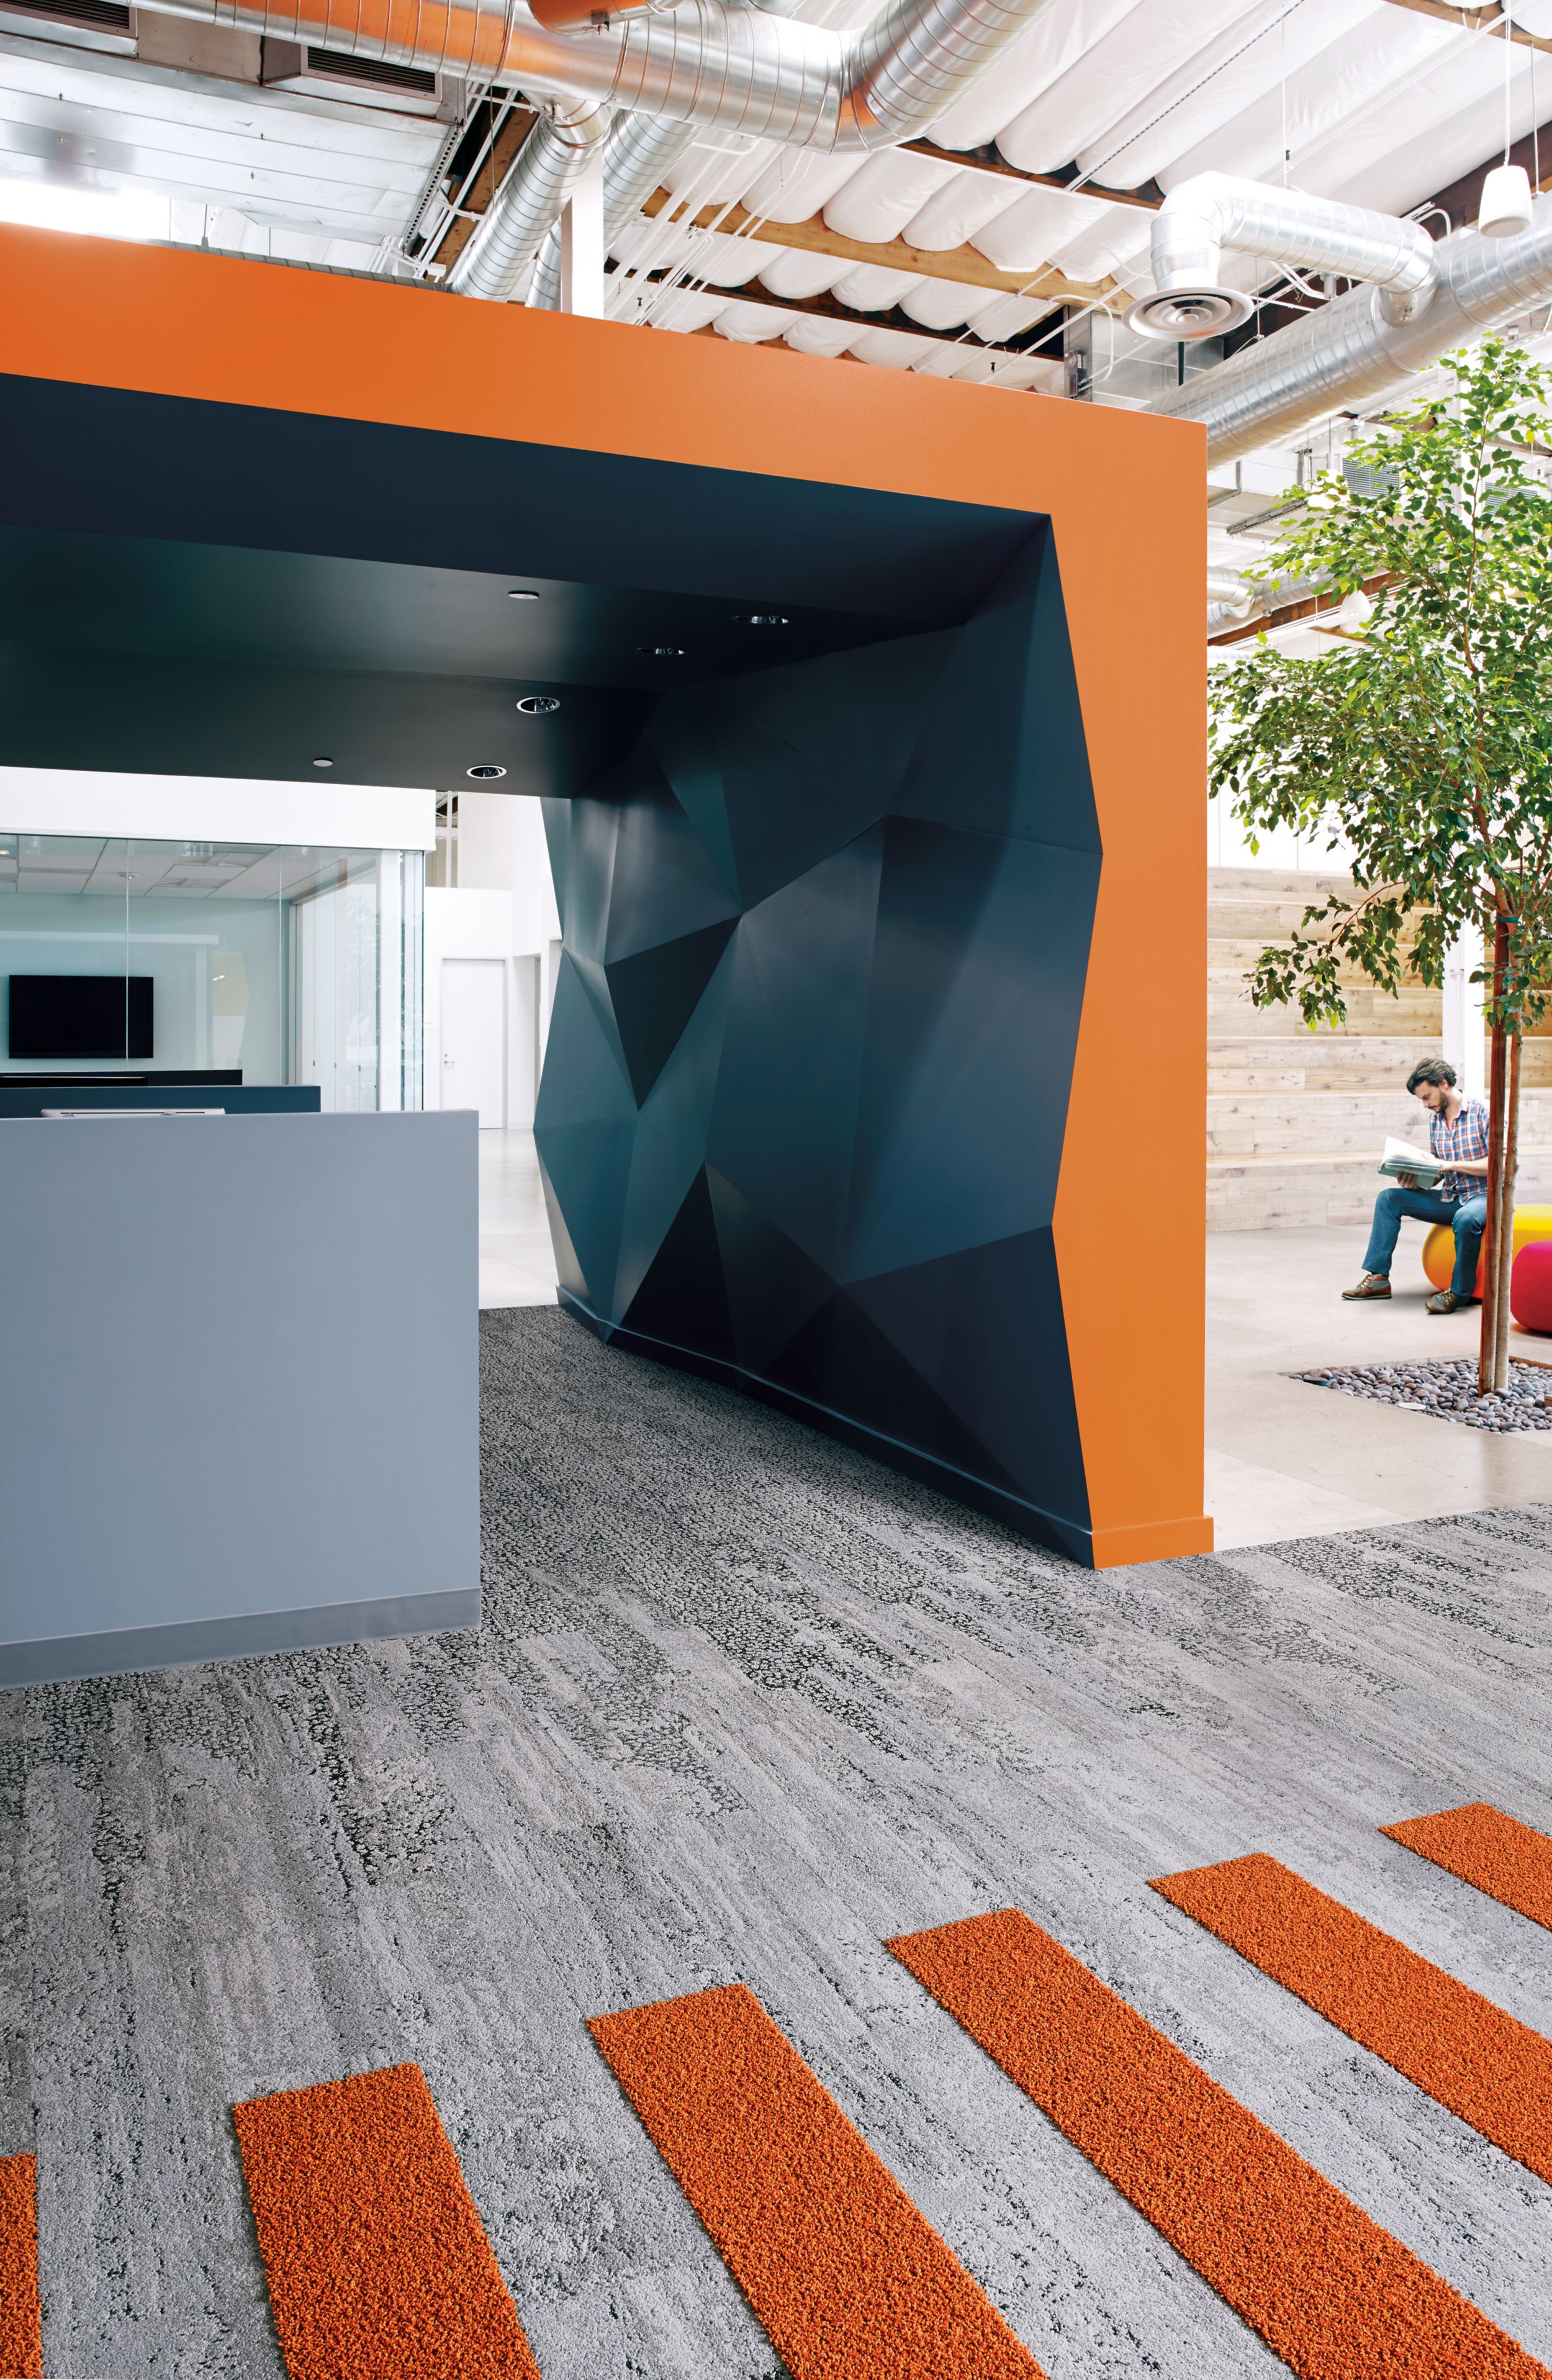 Interface HN810, HN830, HN840 and HN850 plank carpet tiles in blue and orange covered space with man reading on ball chair afbeeldingnummer 10